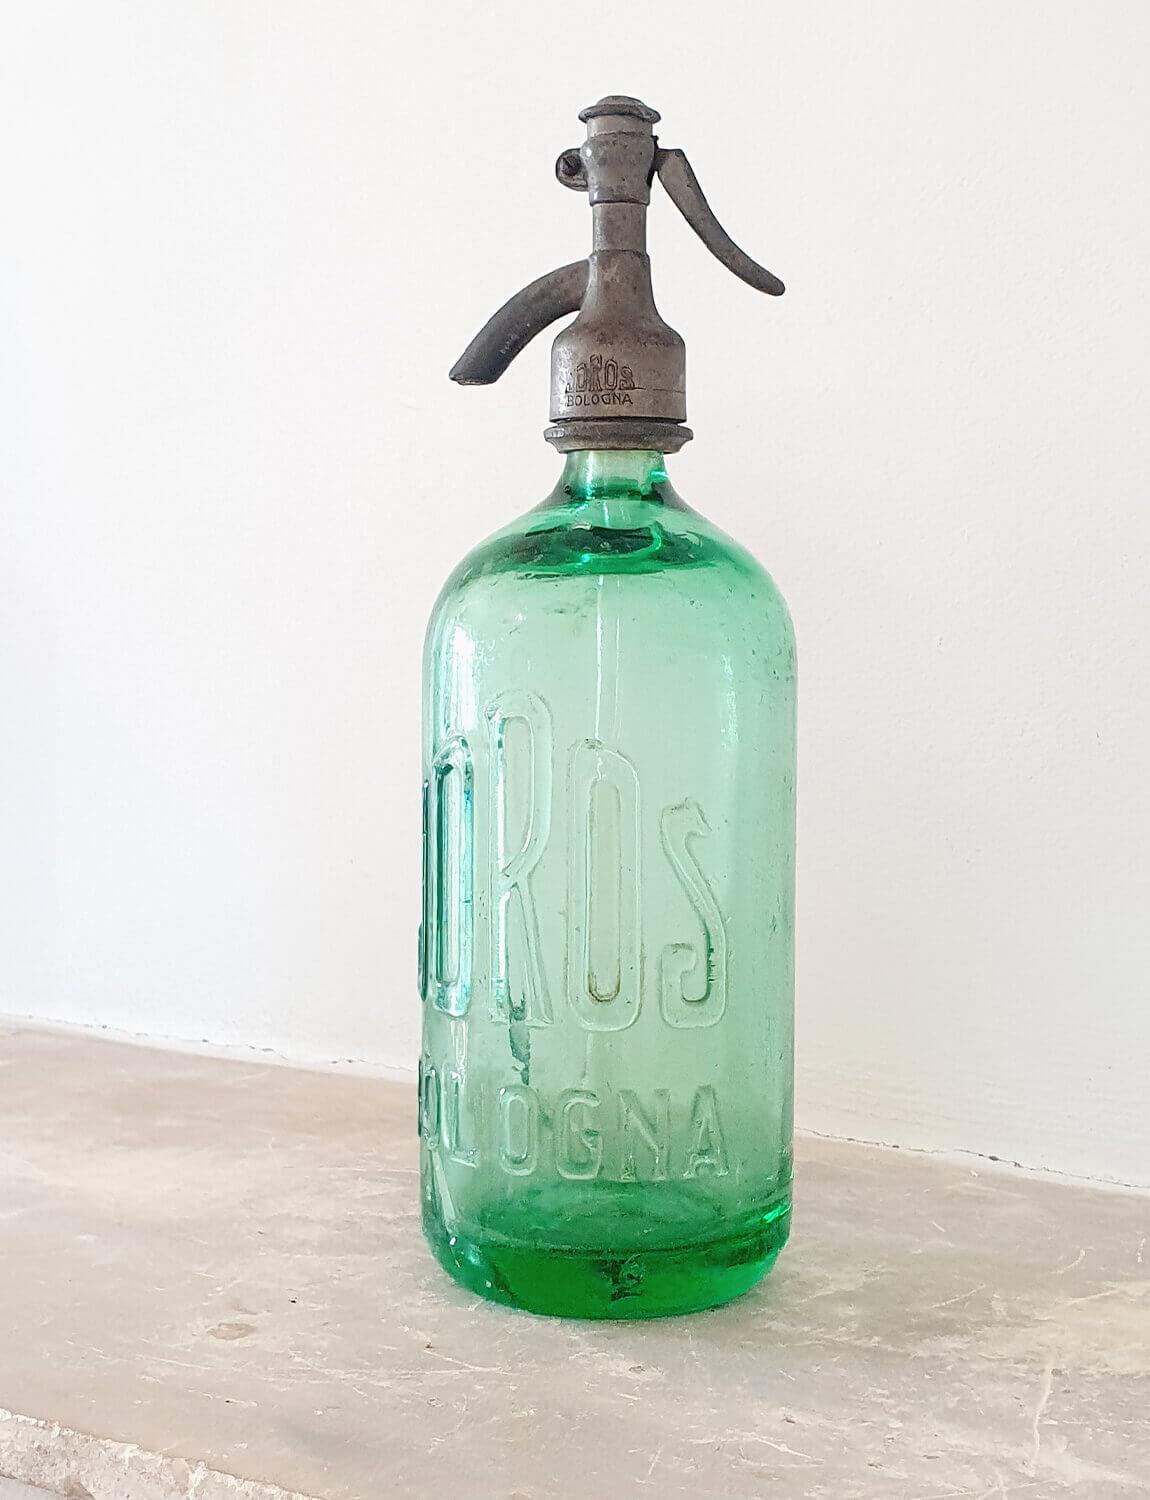 Rare beautiful green soda bottle with the words Joros Bologna in raised lettering on the bottle. This is a beautiful piece but there is a large internal crack in the glass which is reflected in the price. It is so pretty that as a display piece I